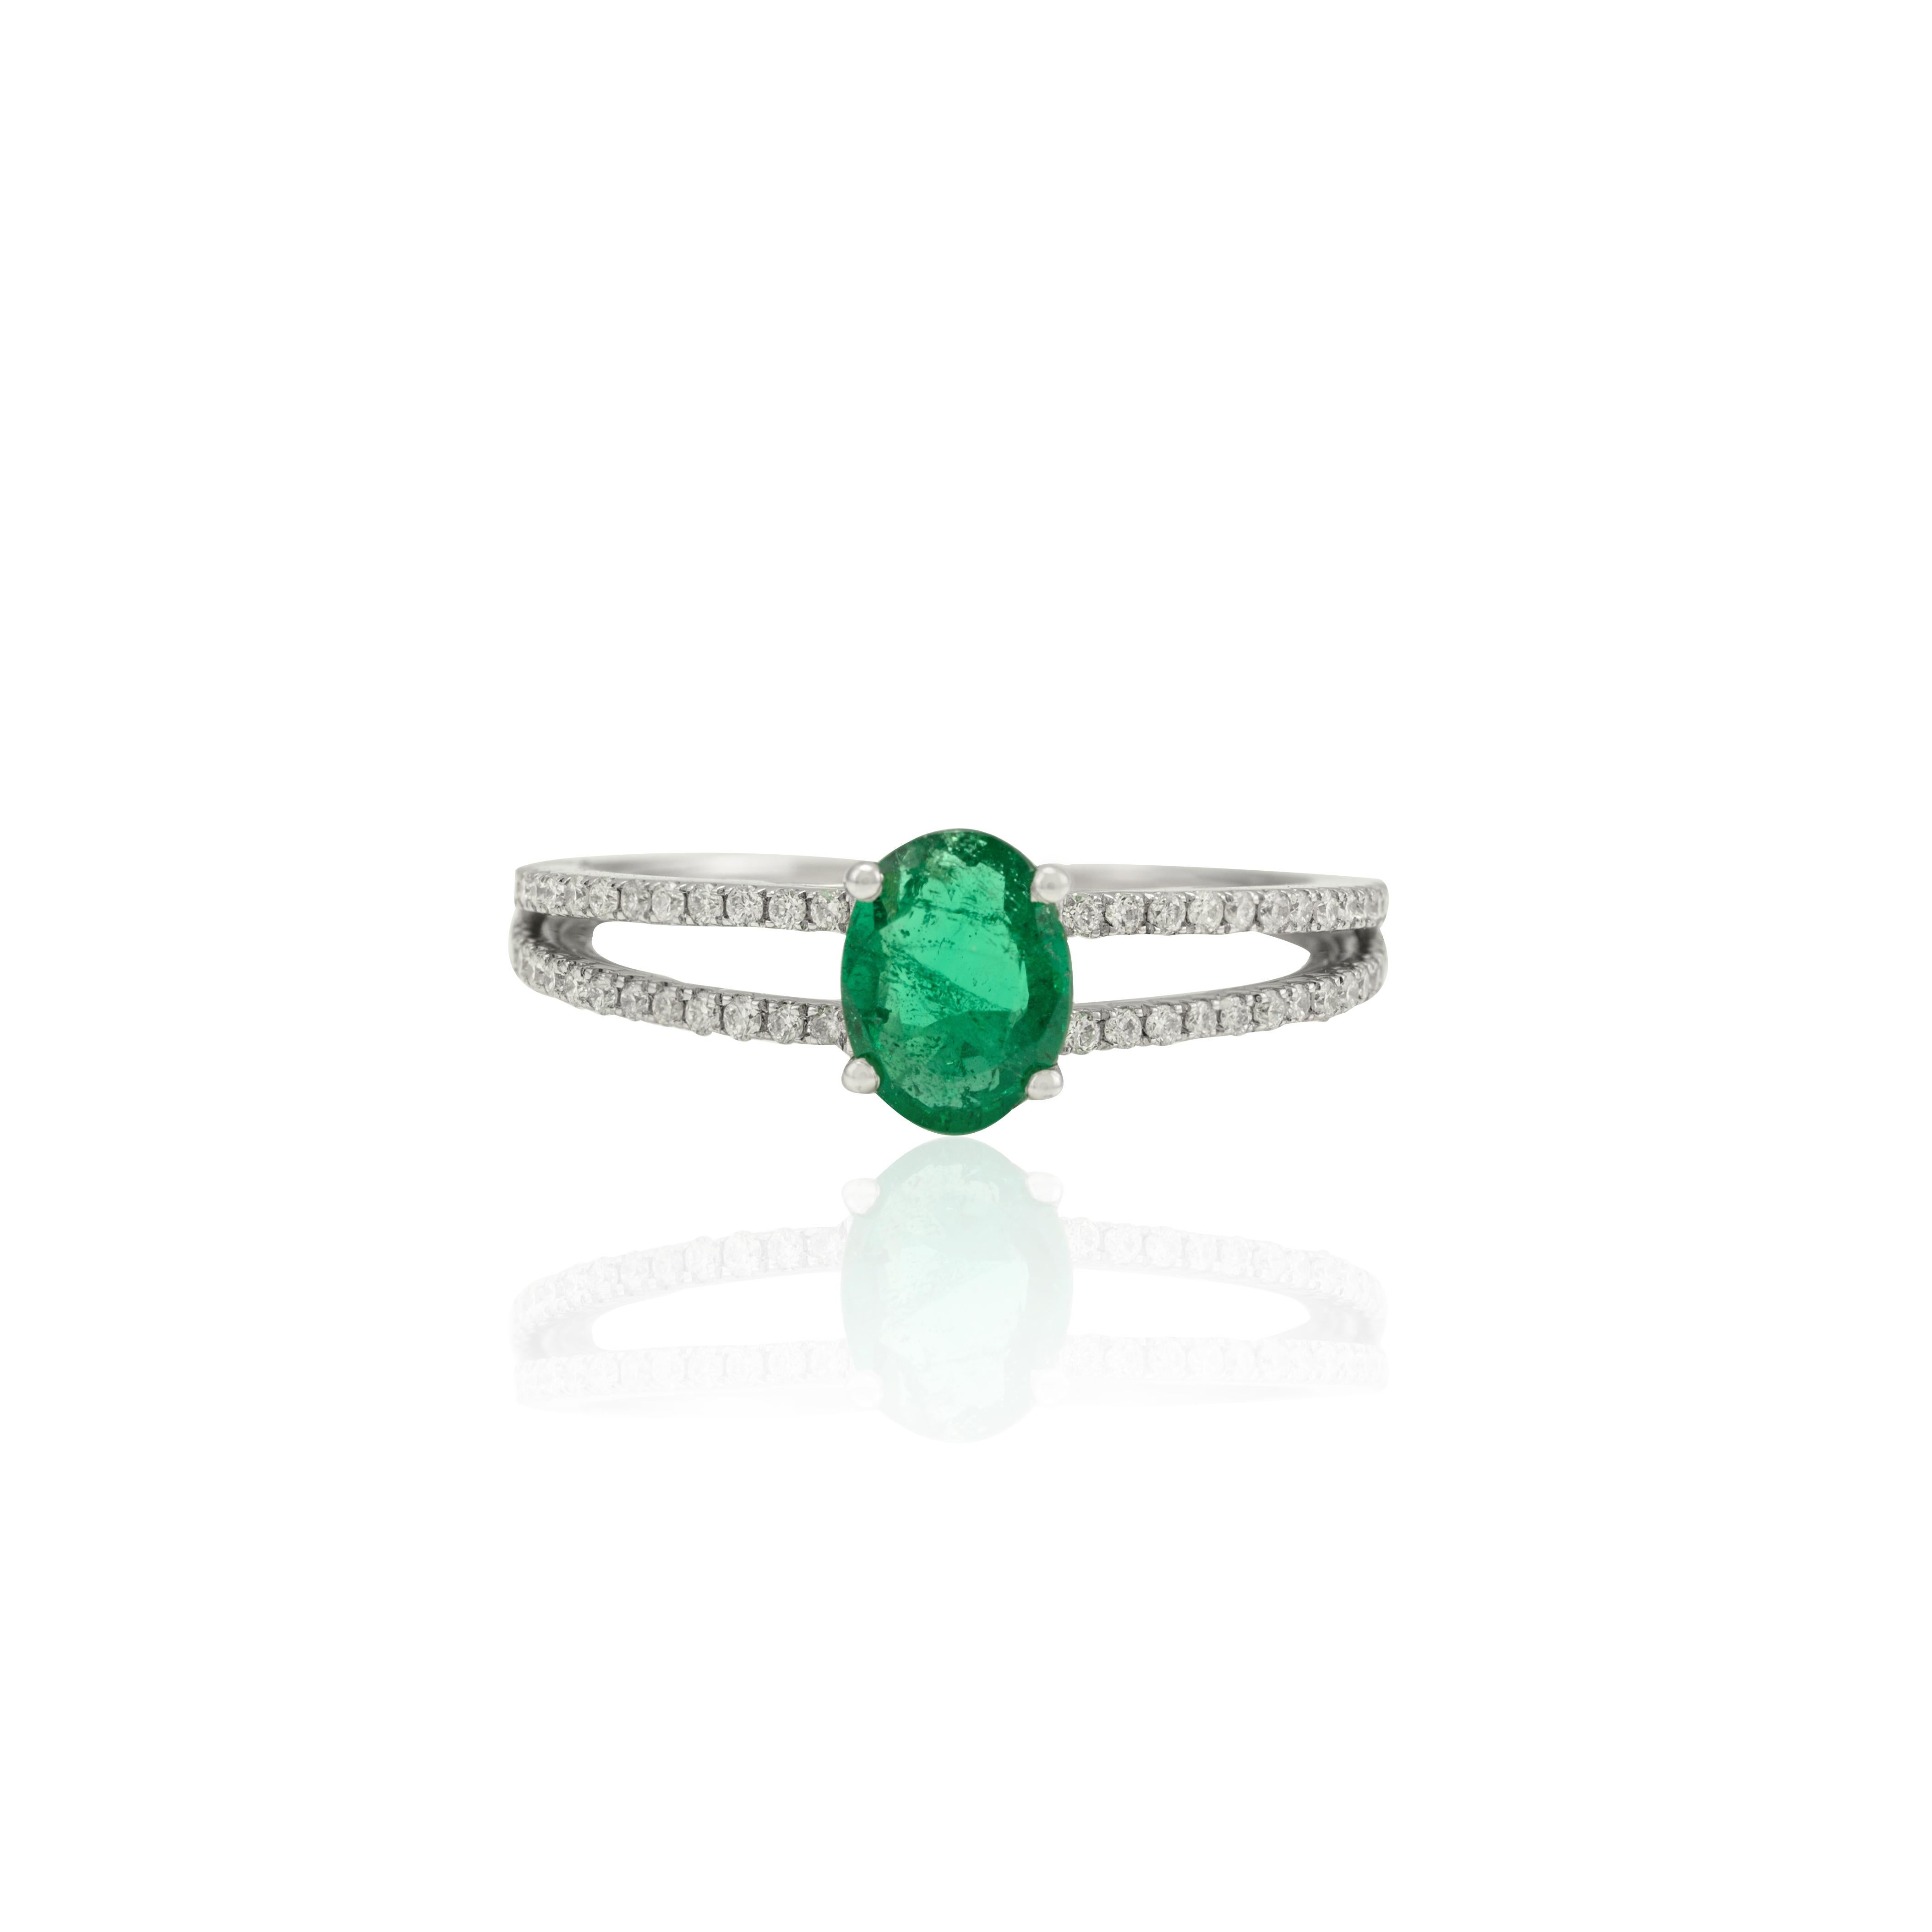 For Sale:  Genuine Oval Cut Emerald and Diamond Ring in Solid 18k White Gold 7